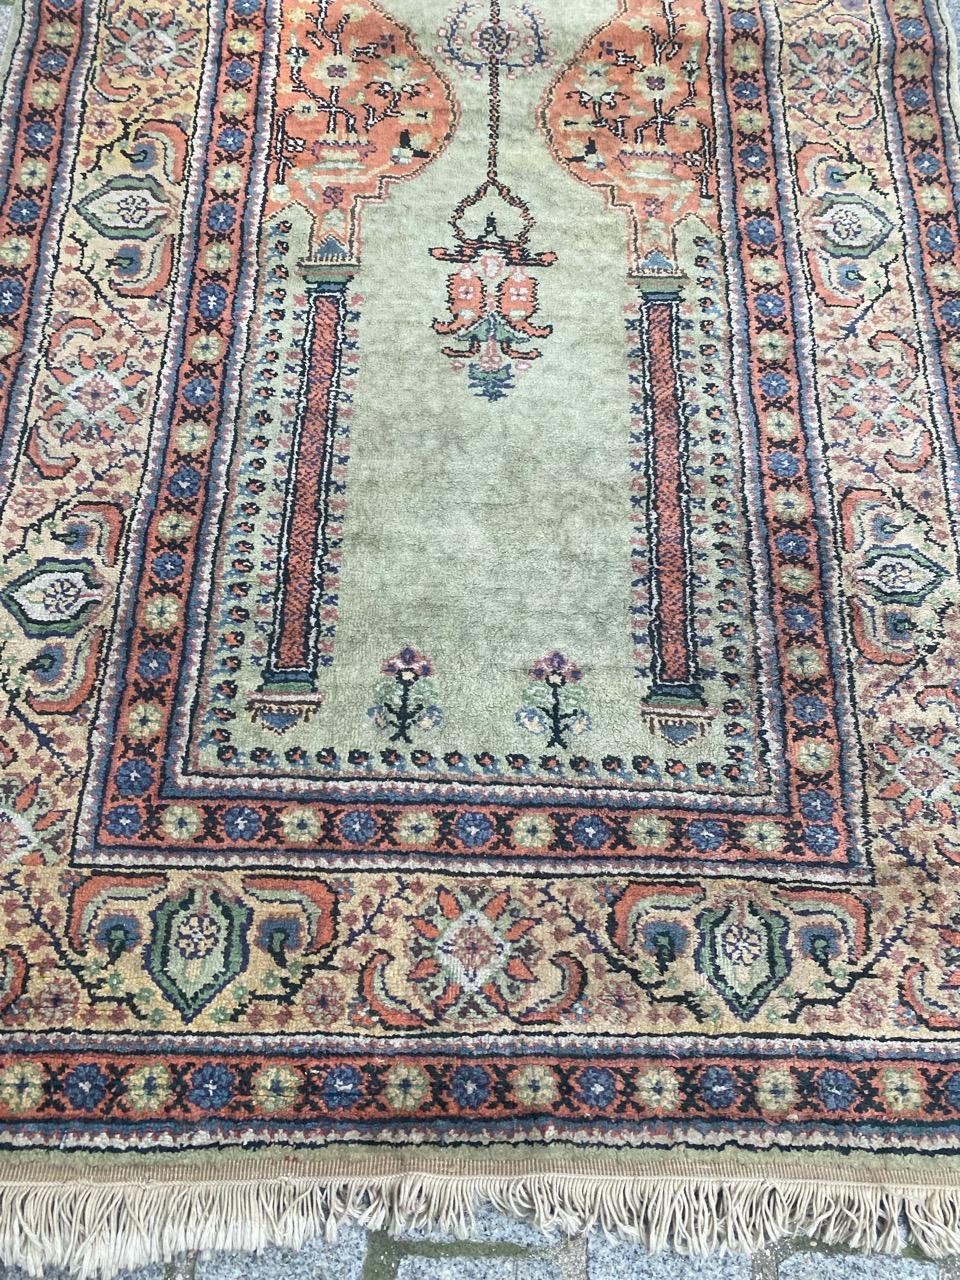 Pretty Mid Century Turkish Kayseri rug with beautiful mihrab design and nice colors, entirely hand knotted with silk and cotton on cotton foundation.

✨✨✨
